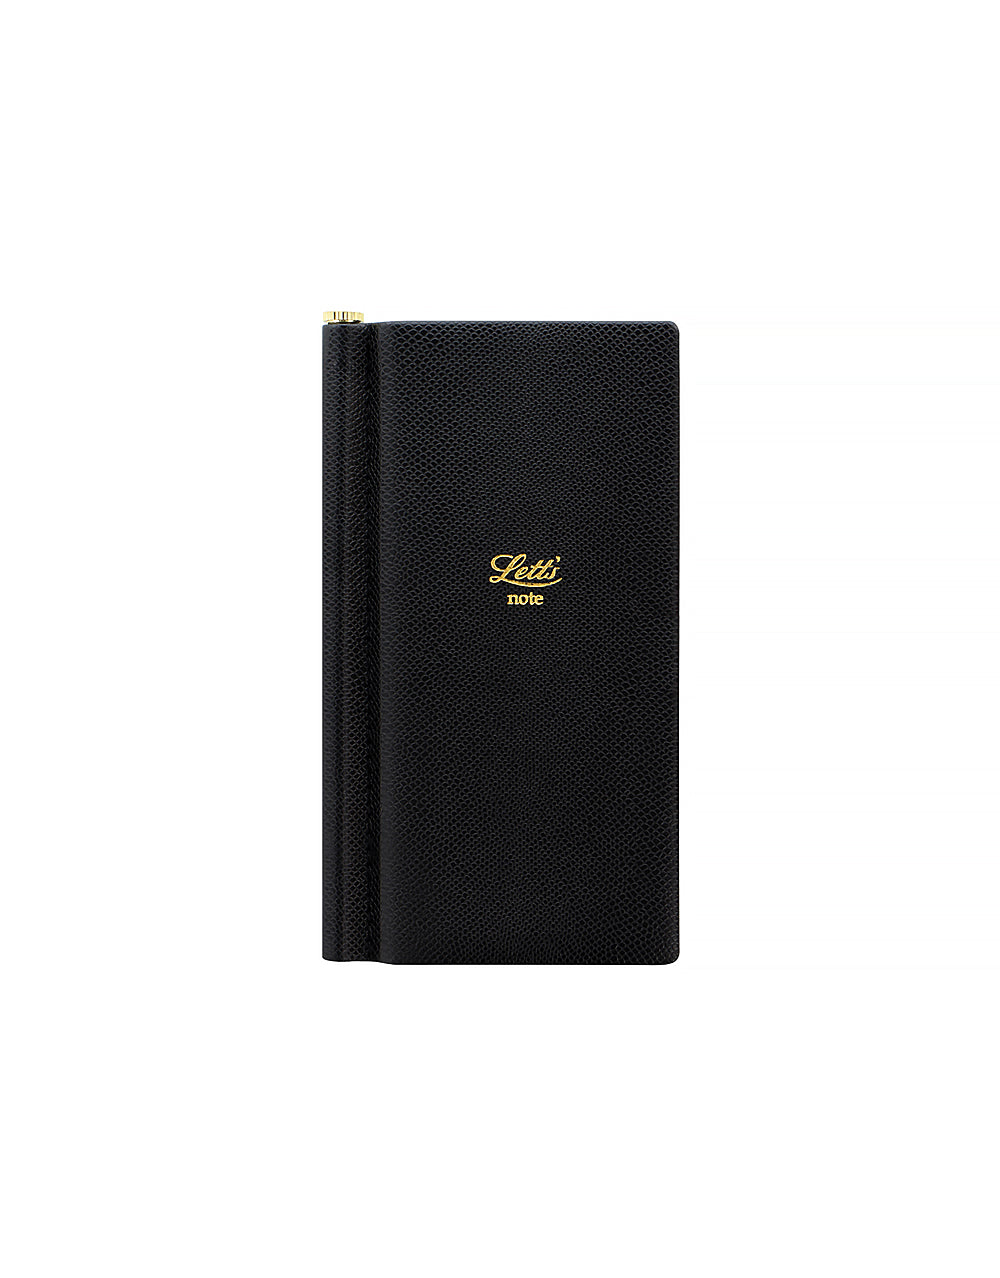 Legacy Slim Pocket Ruled Notebook by Letts of London